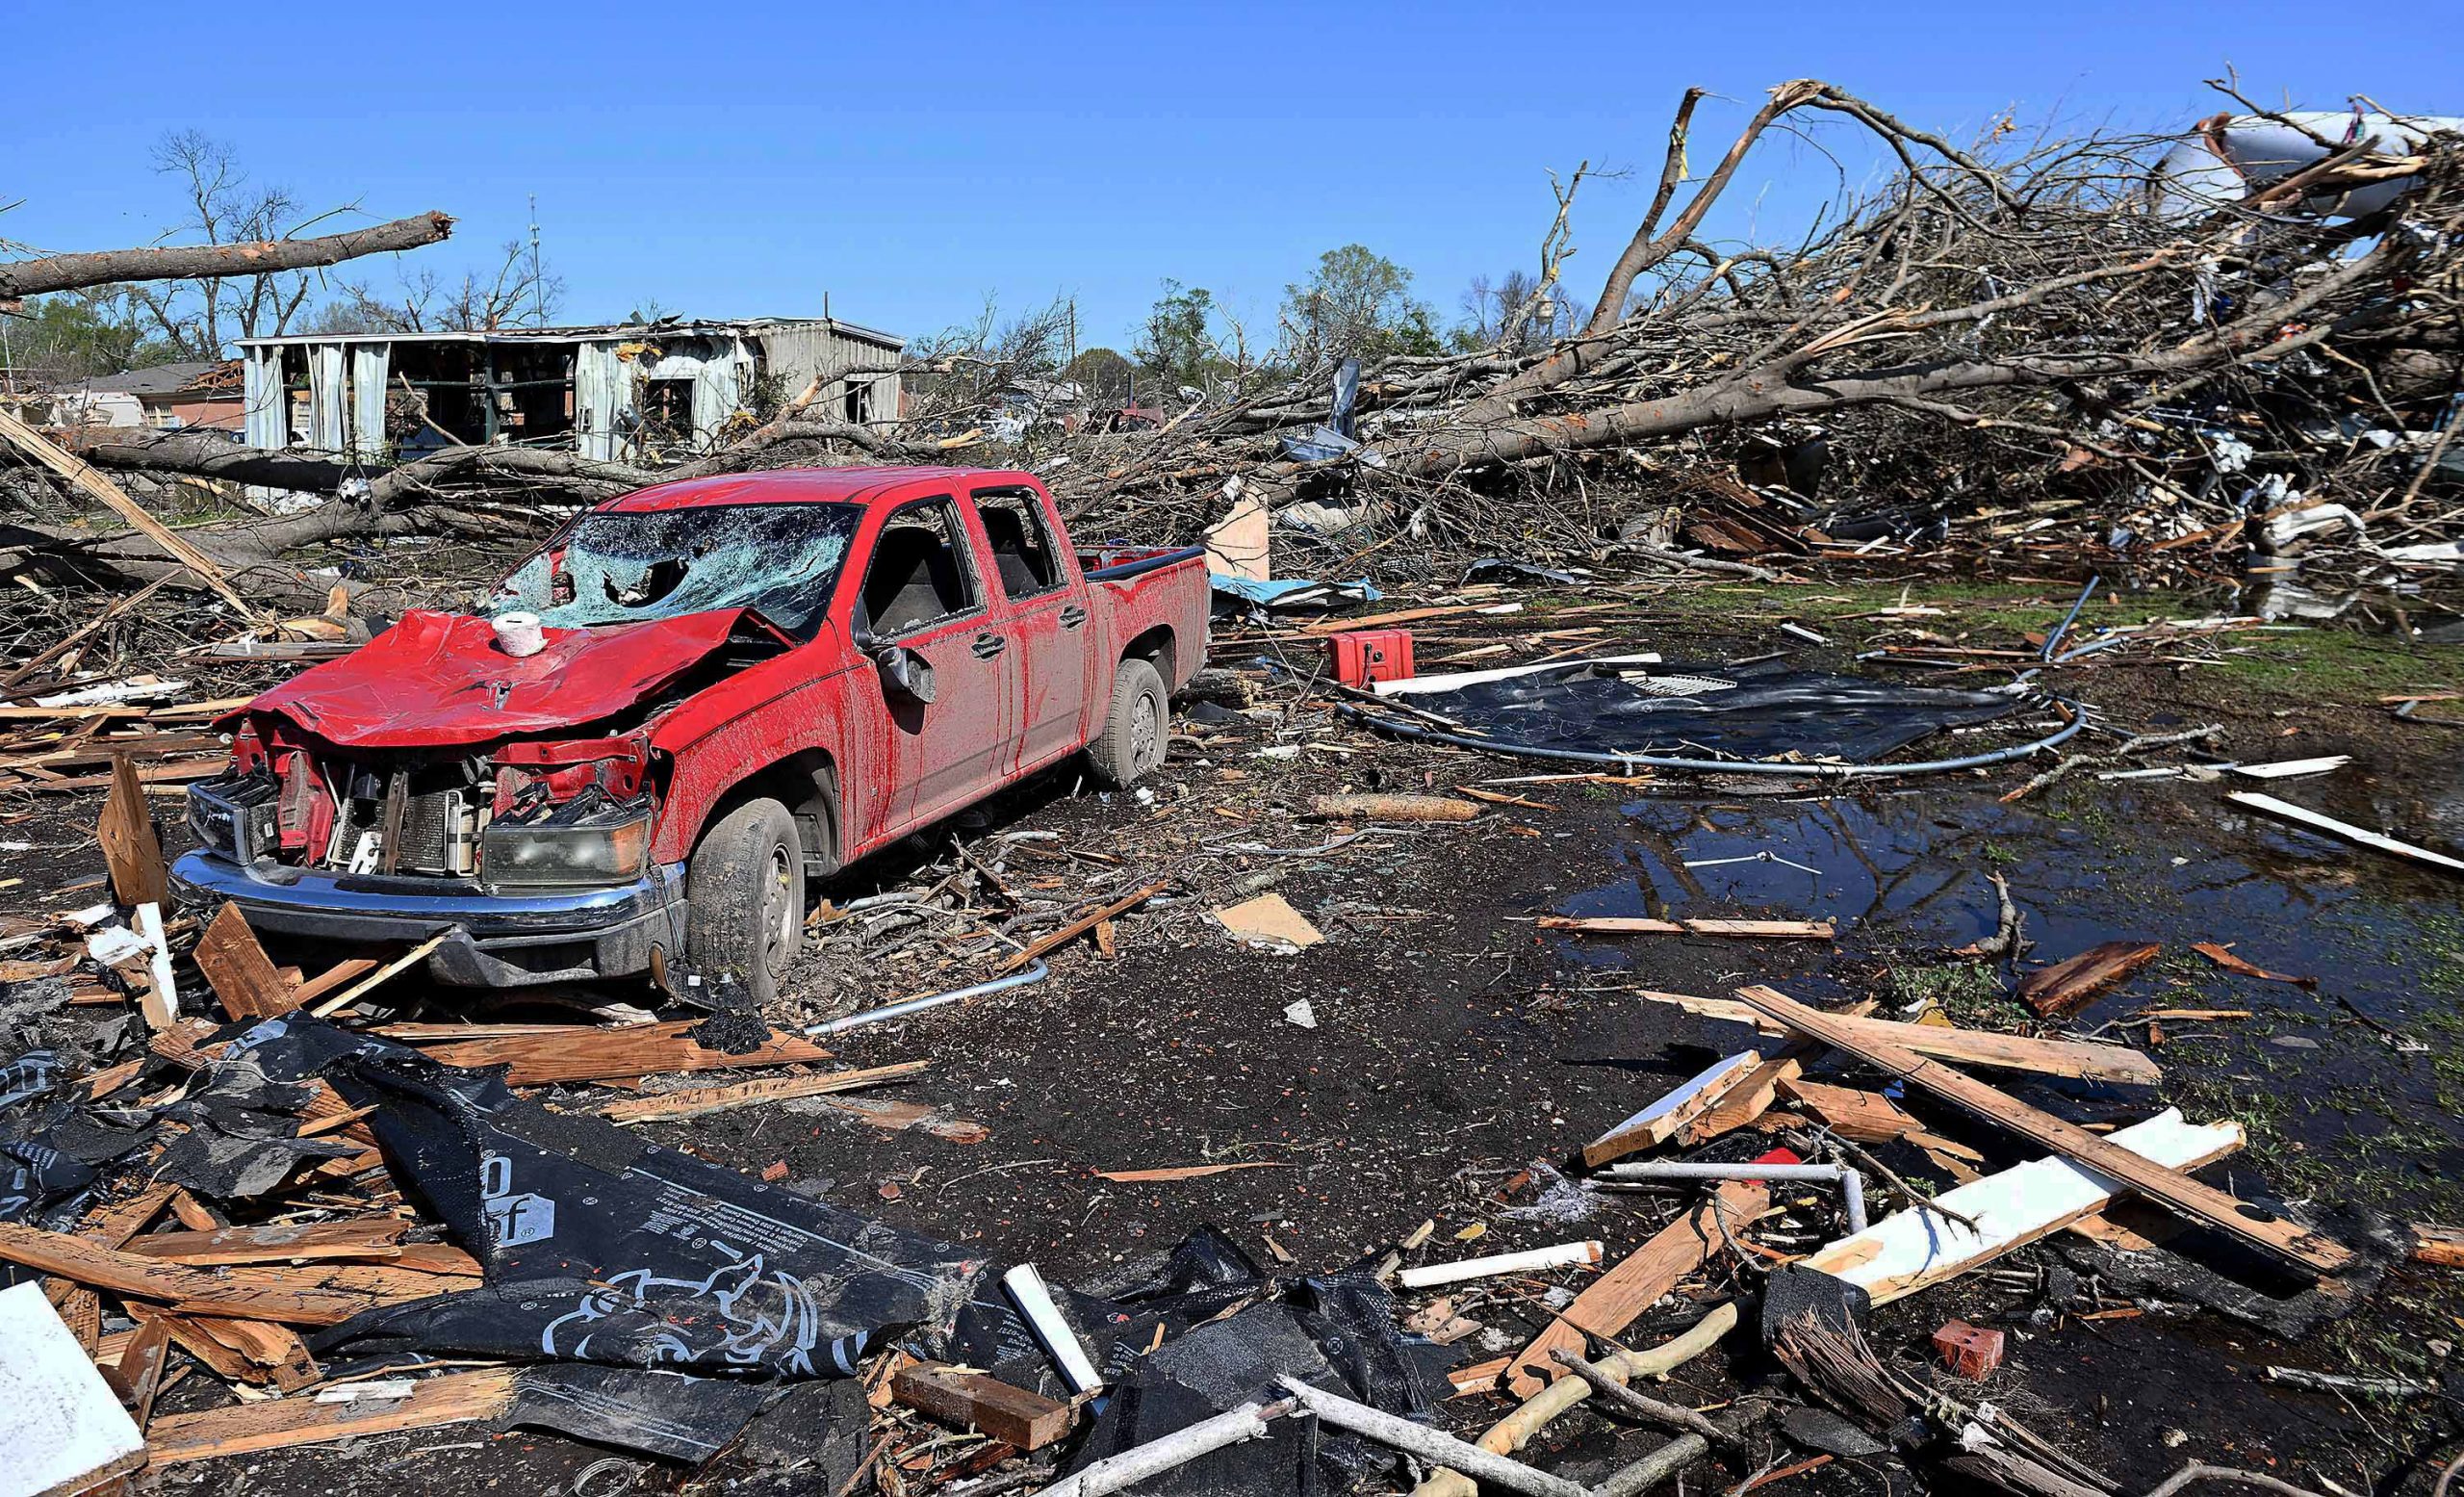 epa10544613 A destroyed car stands amid the devastation after a tornado struck in Rolling Fork, Mississippi, USA, 26 March 2023. At least 25 people have been killed in Mississippi after a tornado and severe weather outbreak on 24 March, according to the Mississippi Emergency Management Agency.  EPA/CHRIS TODD